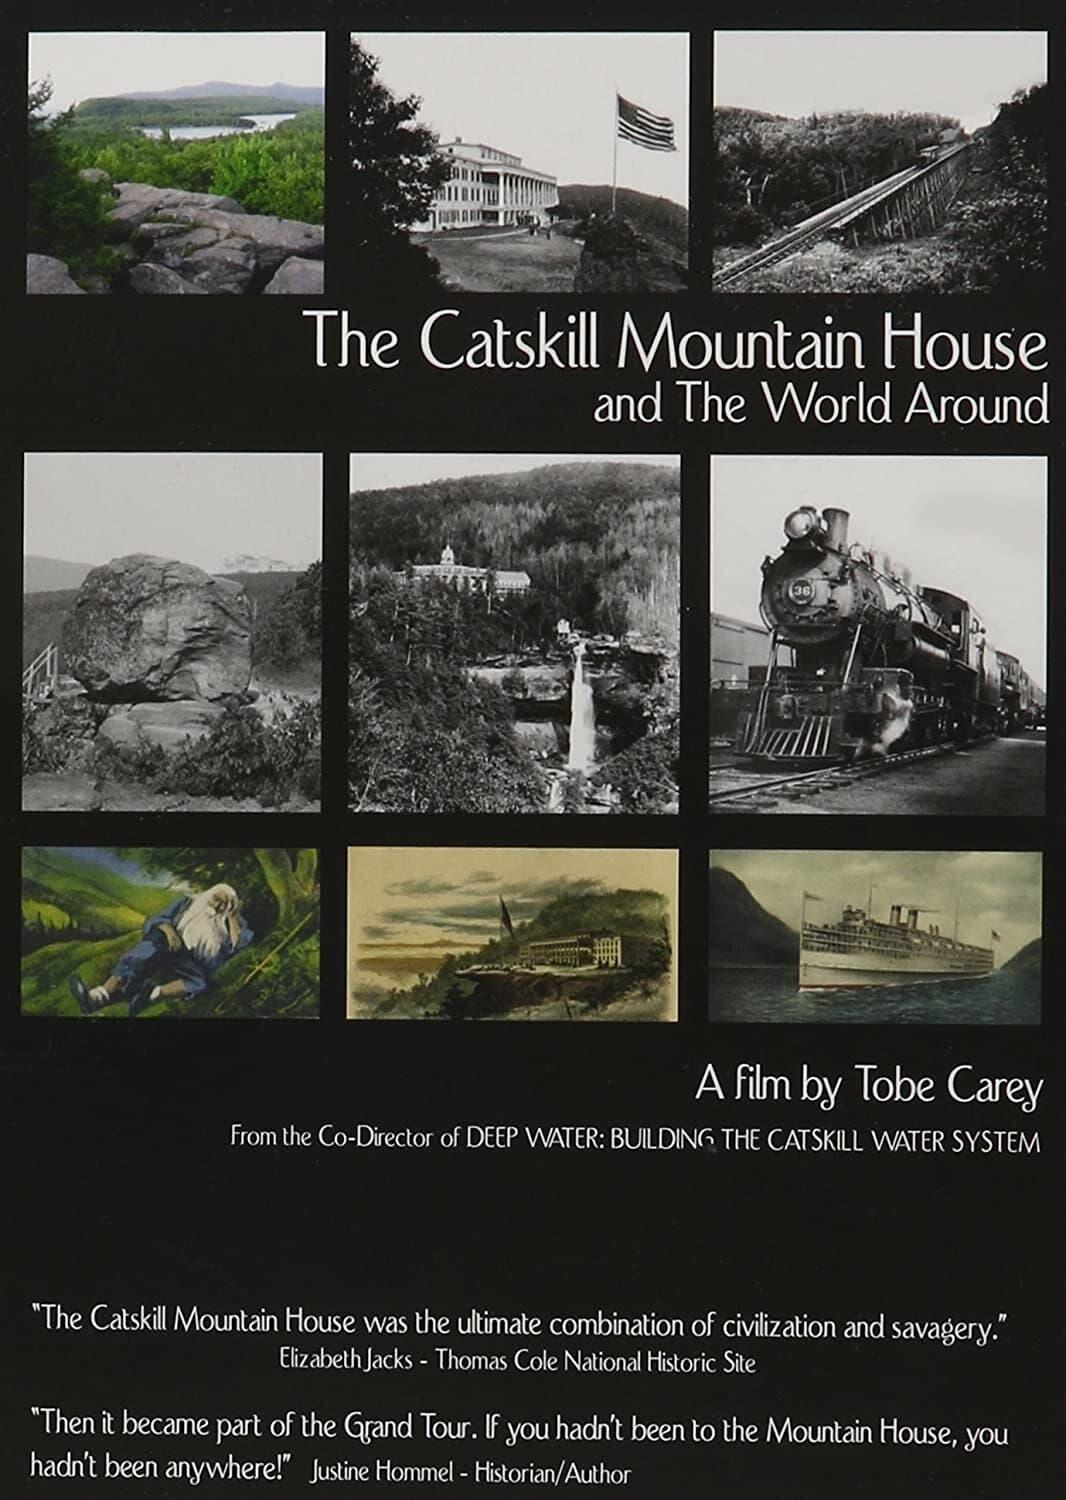 The Catskill Mountain House and the World Around poster